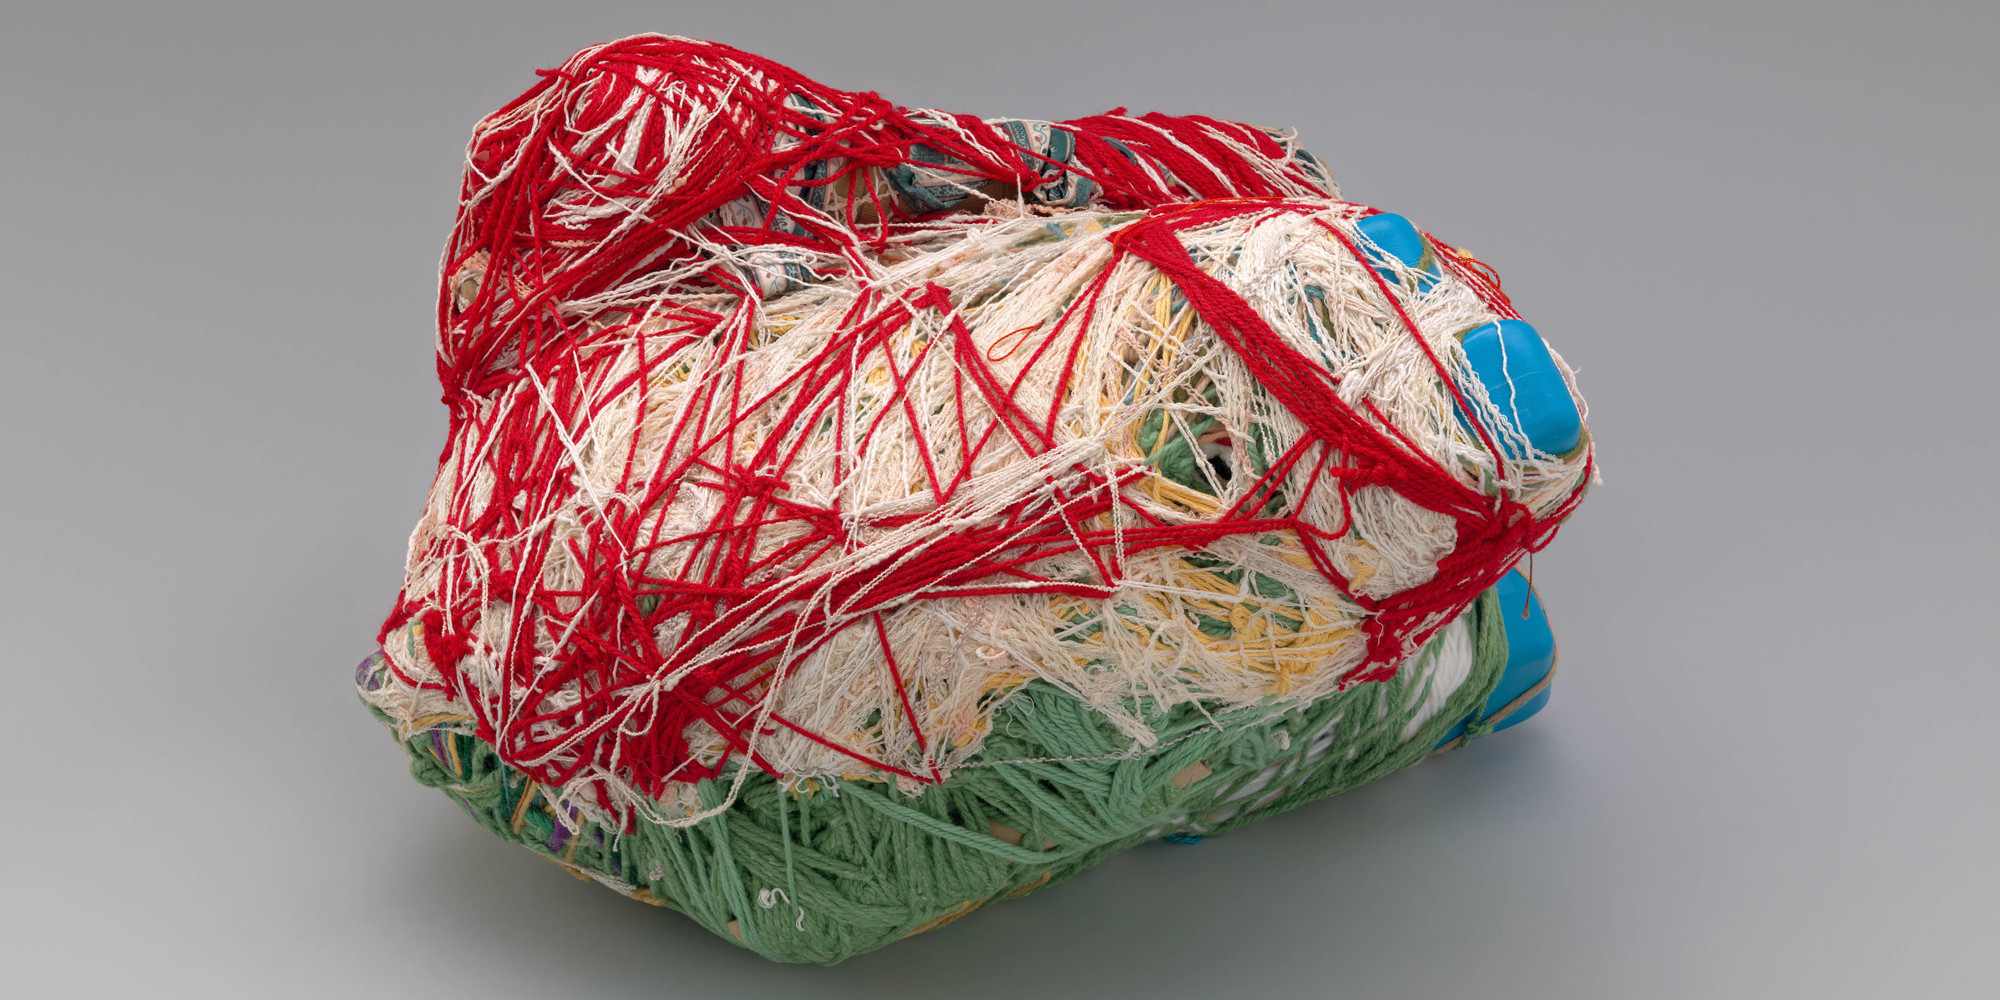 Judith Scott. Untitled. 2002. Found objects assembled and wrapped in twine and yarn, 19 × 8 × 9&#34; (48.3 × 20.3 × 22.9 cm). Gift of Martin and Rebecca Eisenberg in honor of Matthew Higgs